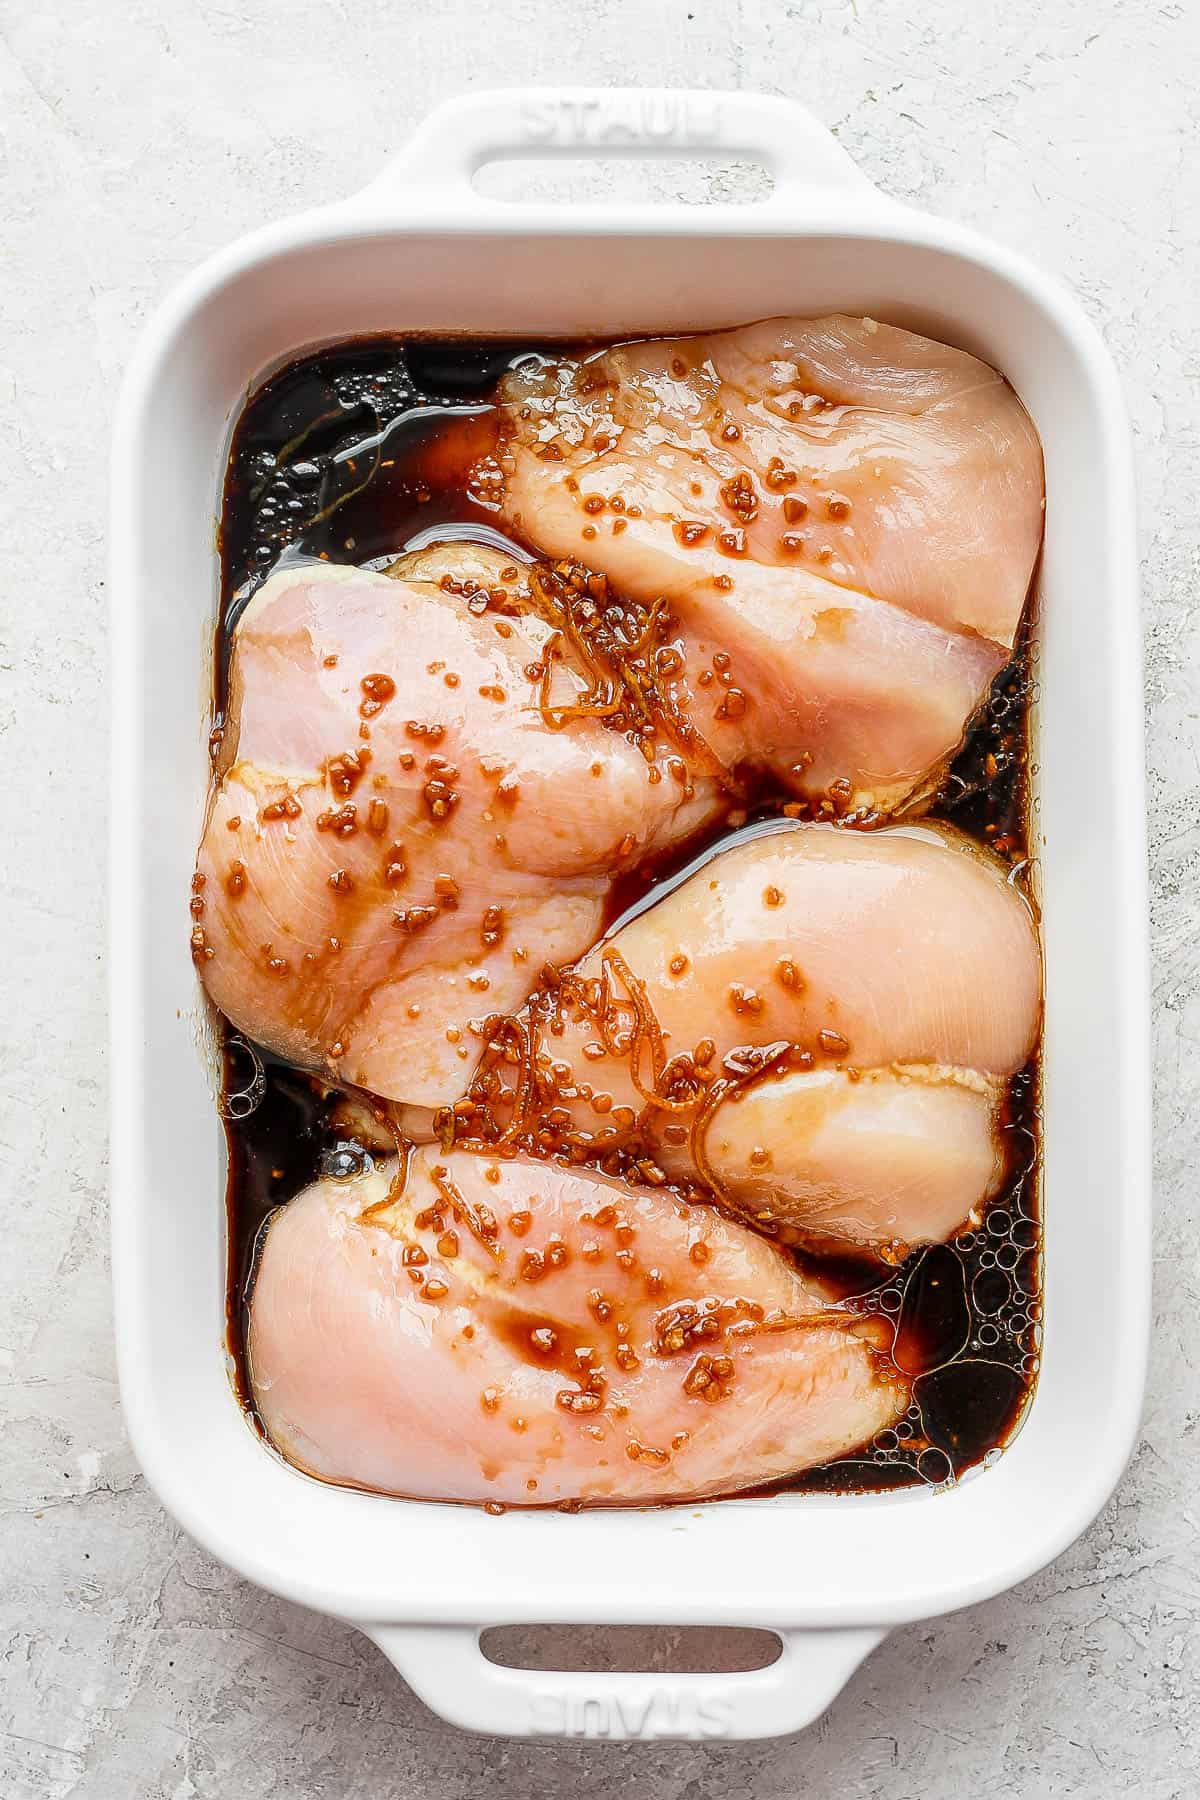 Raw chicken breasts in a pan with marinade on top.